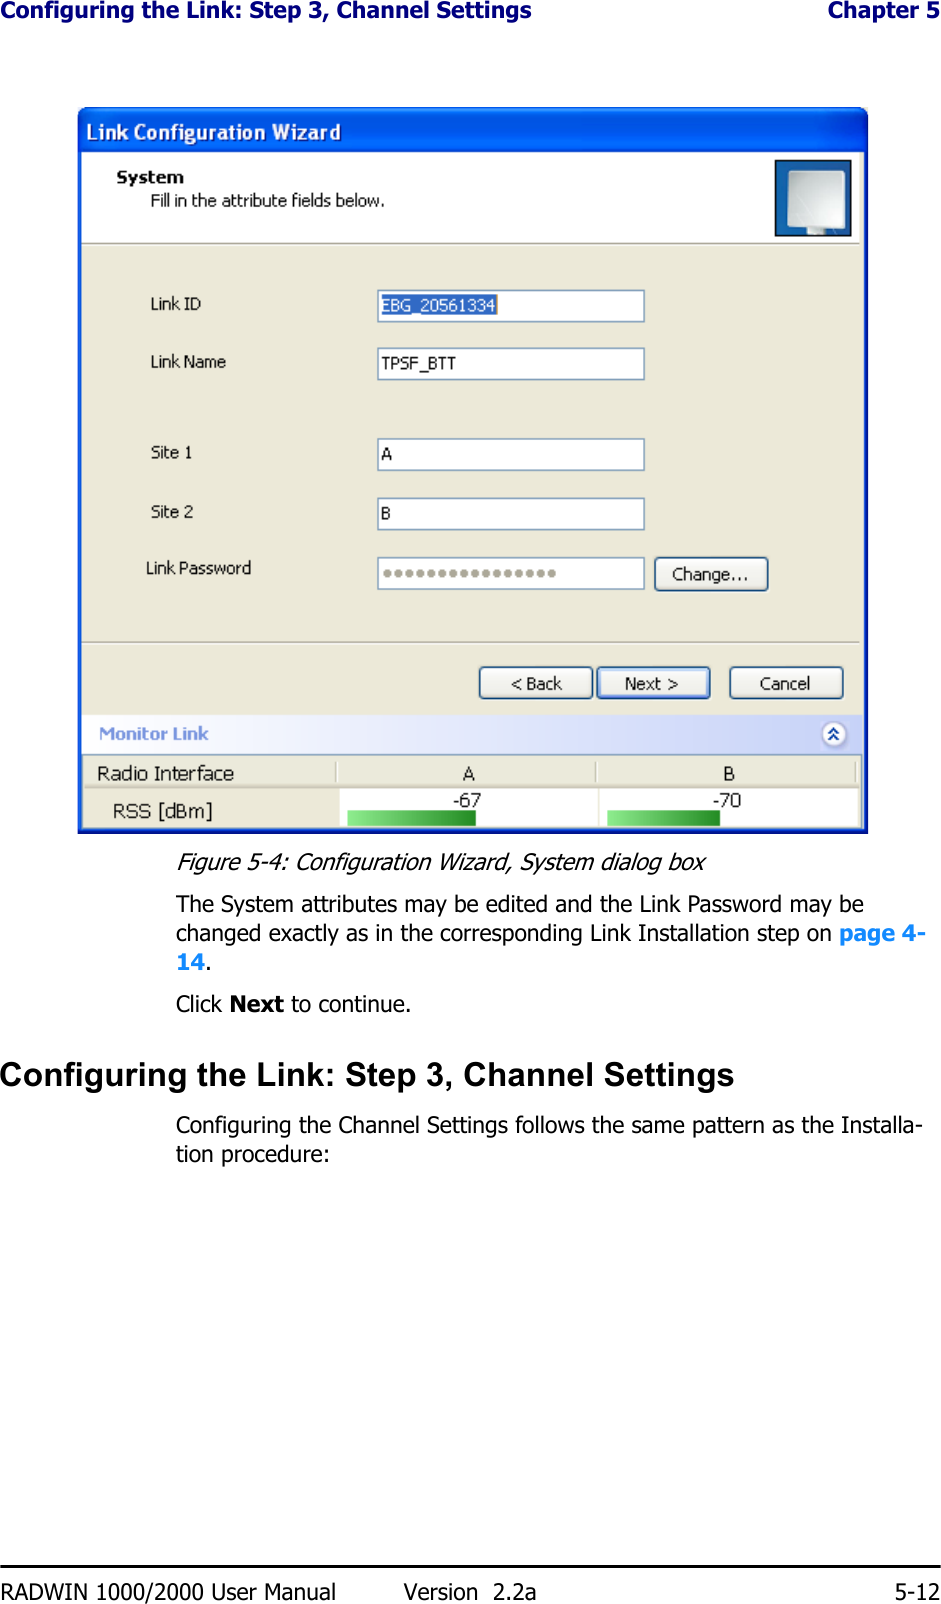 Configuring the Link: Step 3, Channel Settings  Chapter 5RADWIN 1000/2000 User Manual Version  2.2a 5-12Figure 5-4: Configuration Wizard, System dialog boxThe System attributes may be edited and the Link Password may be changed exactly as in the corresponding Link Installation step on page 4-14.Click Next to continue.Configuring the Link: Step 3, Channel SettingsConfiguring the Channel Settings follows the same pattern as the Installa-tion procedure: